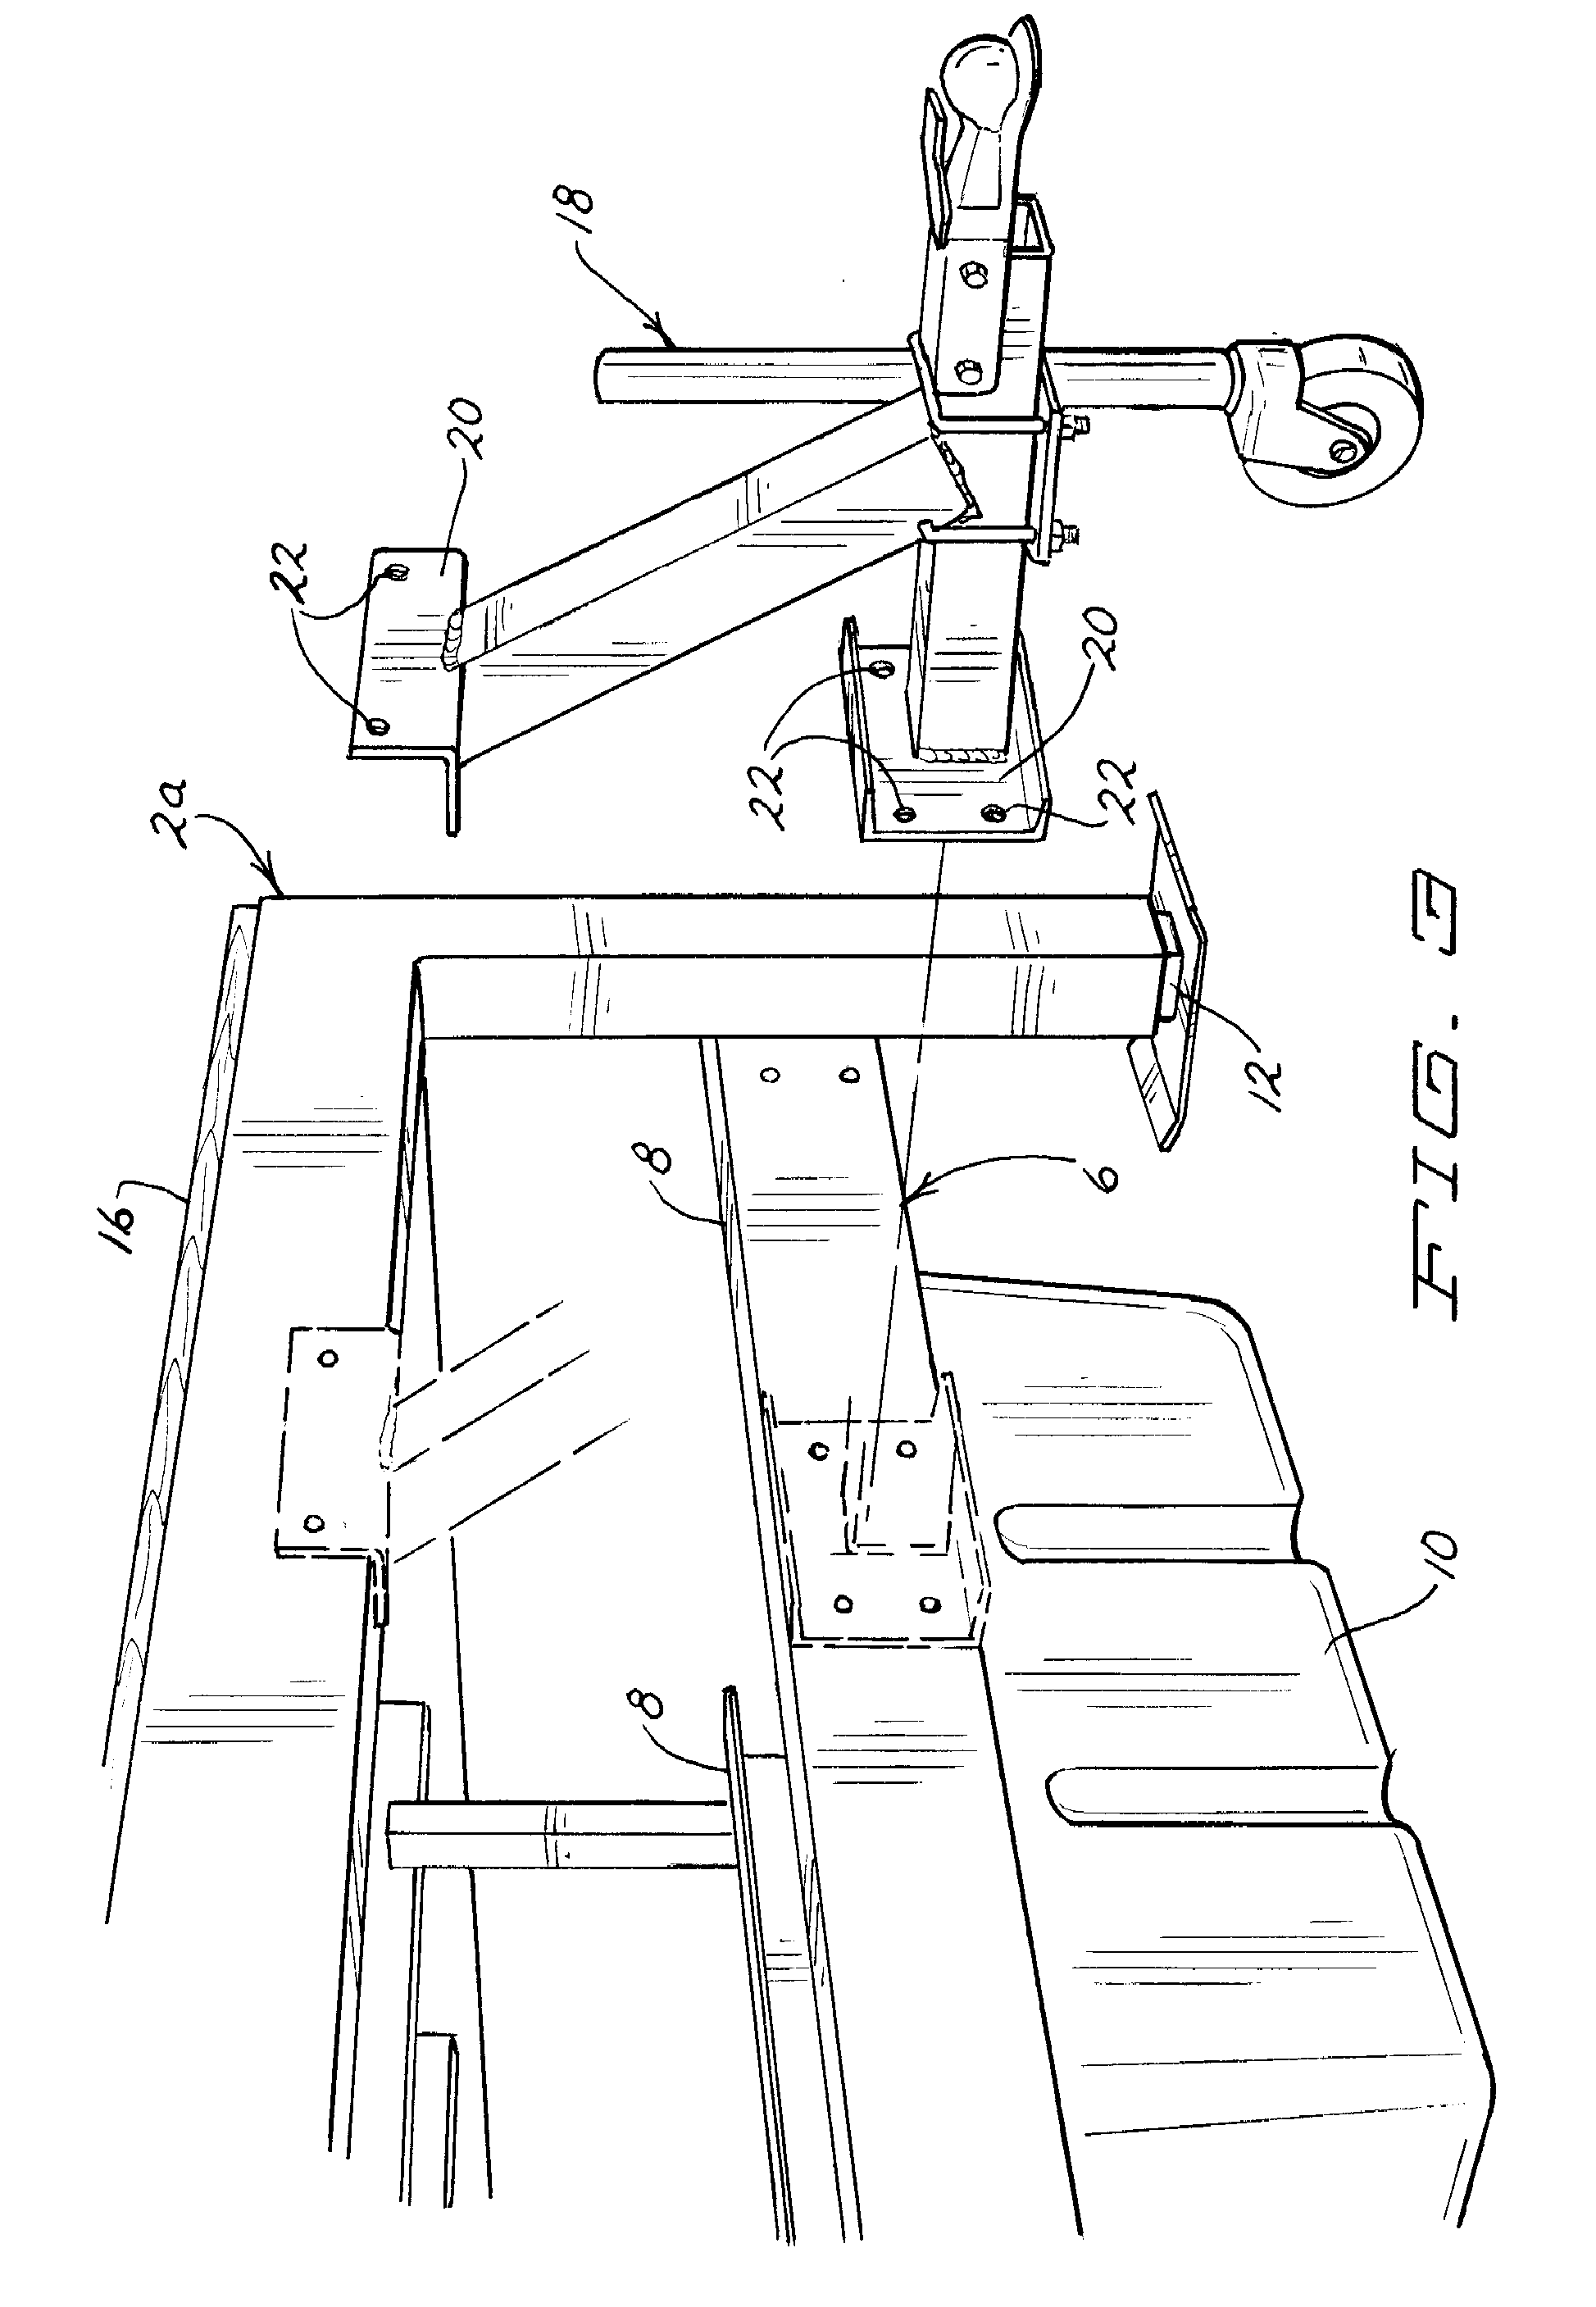 Structure forming a breakwater and capable of ice free, year round operation